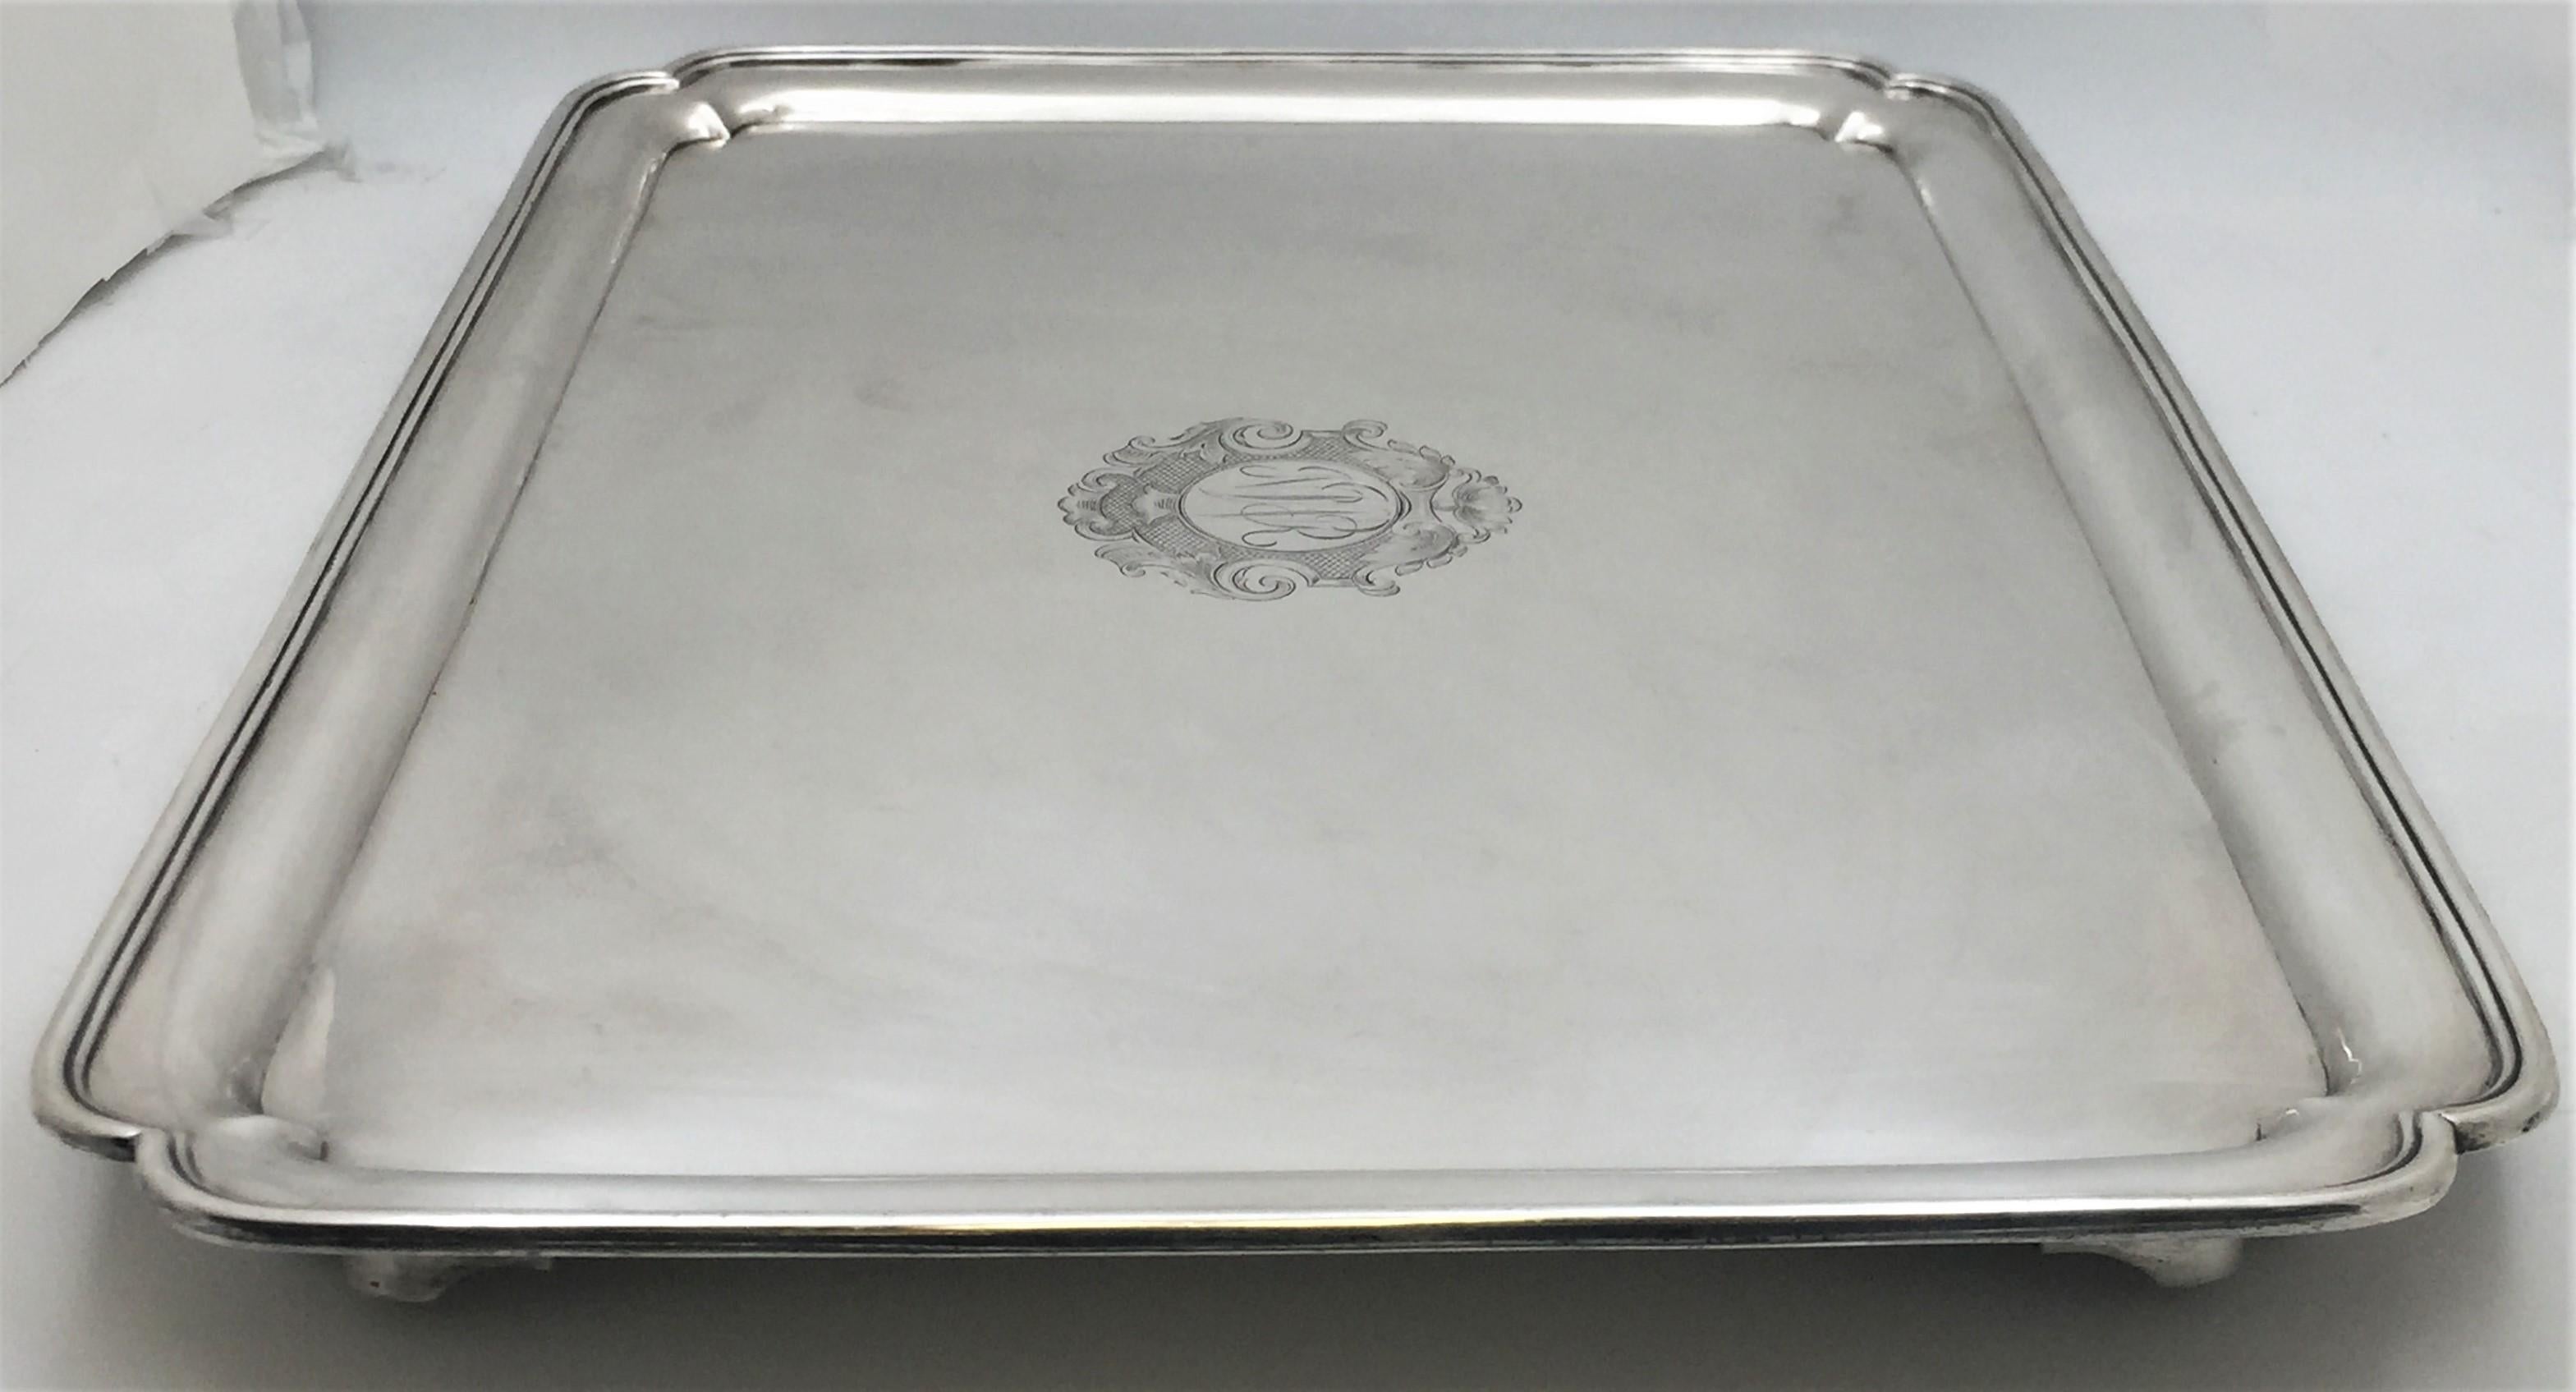 Crichton English Sterling Silver Massive Tray Platter from 1927 Art Deco 2